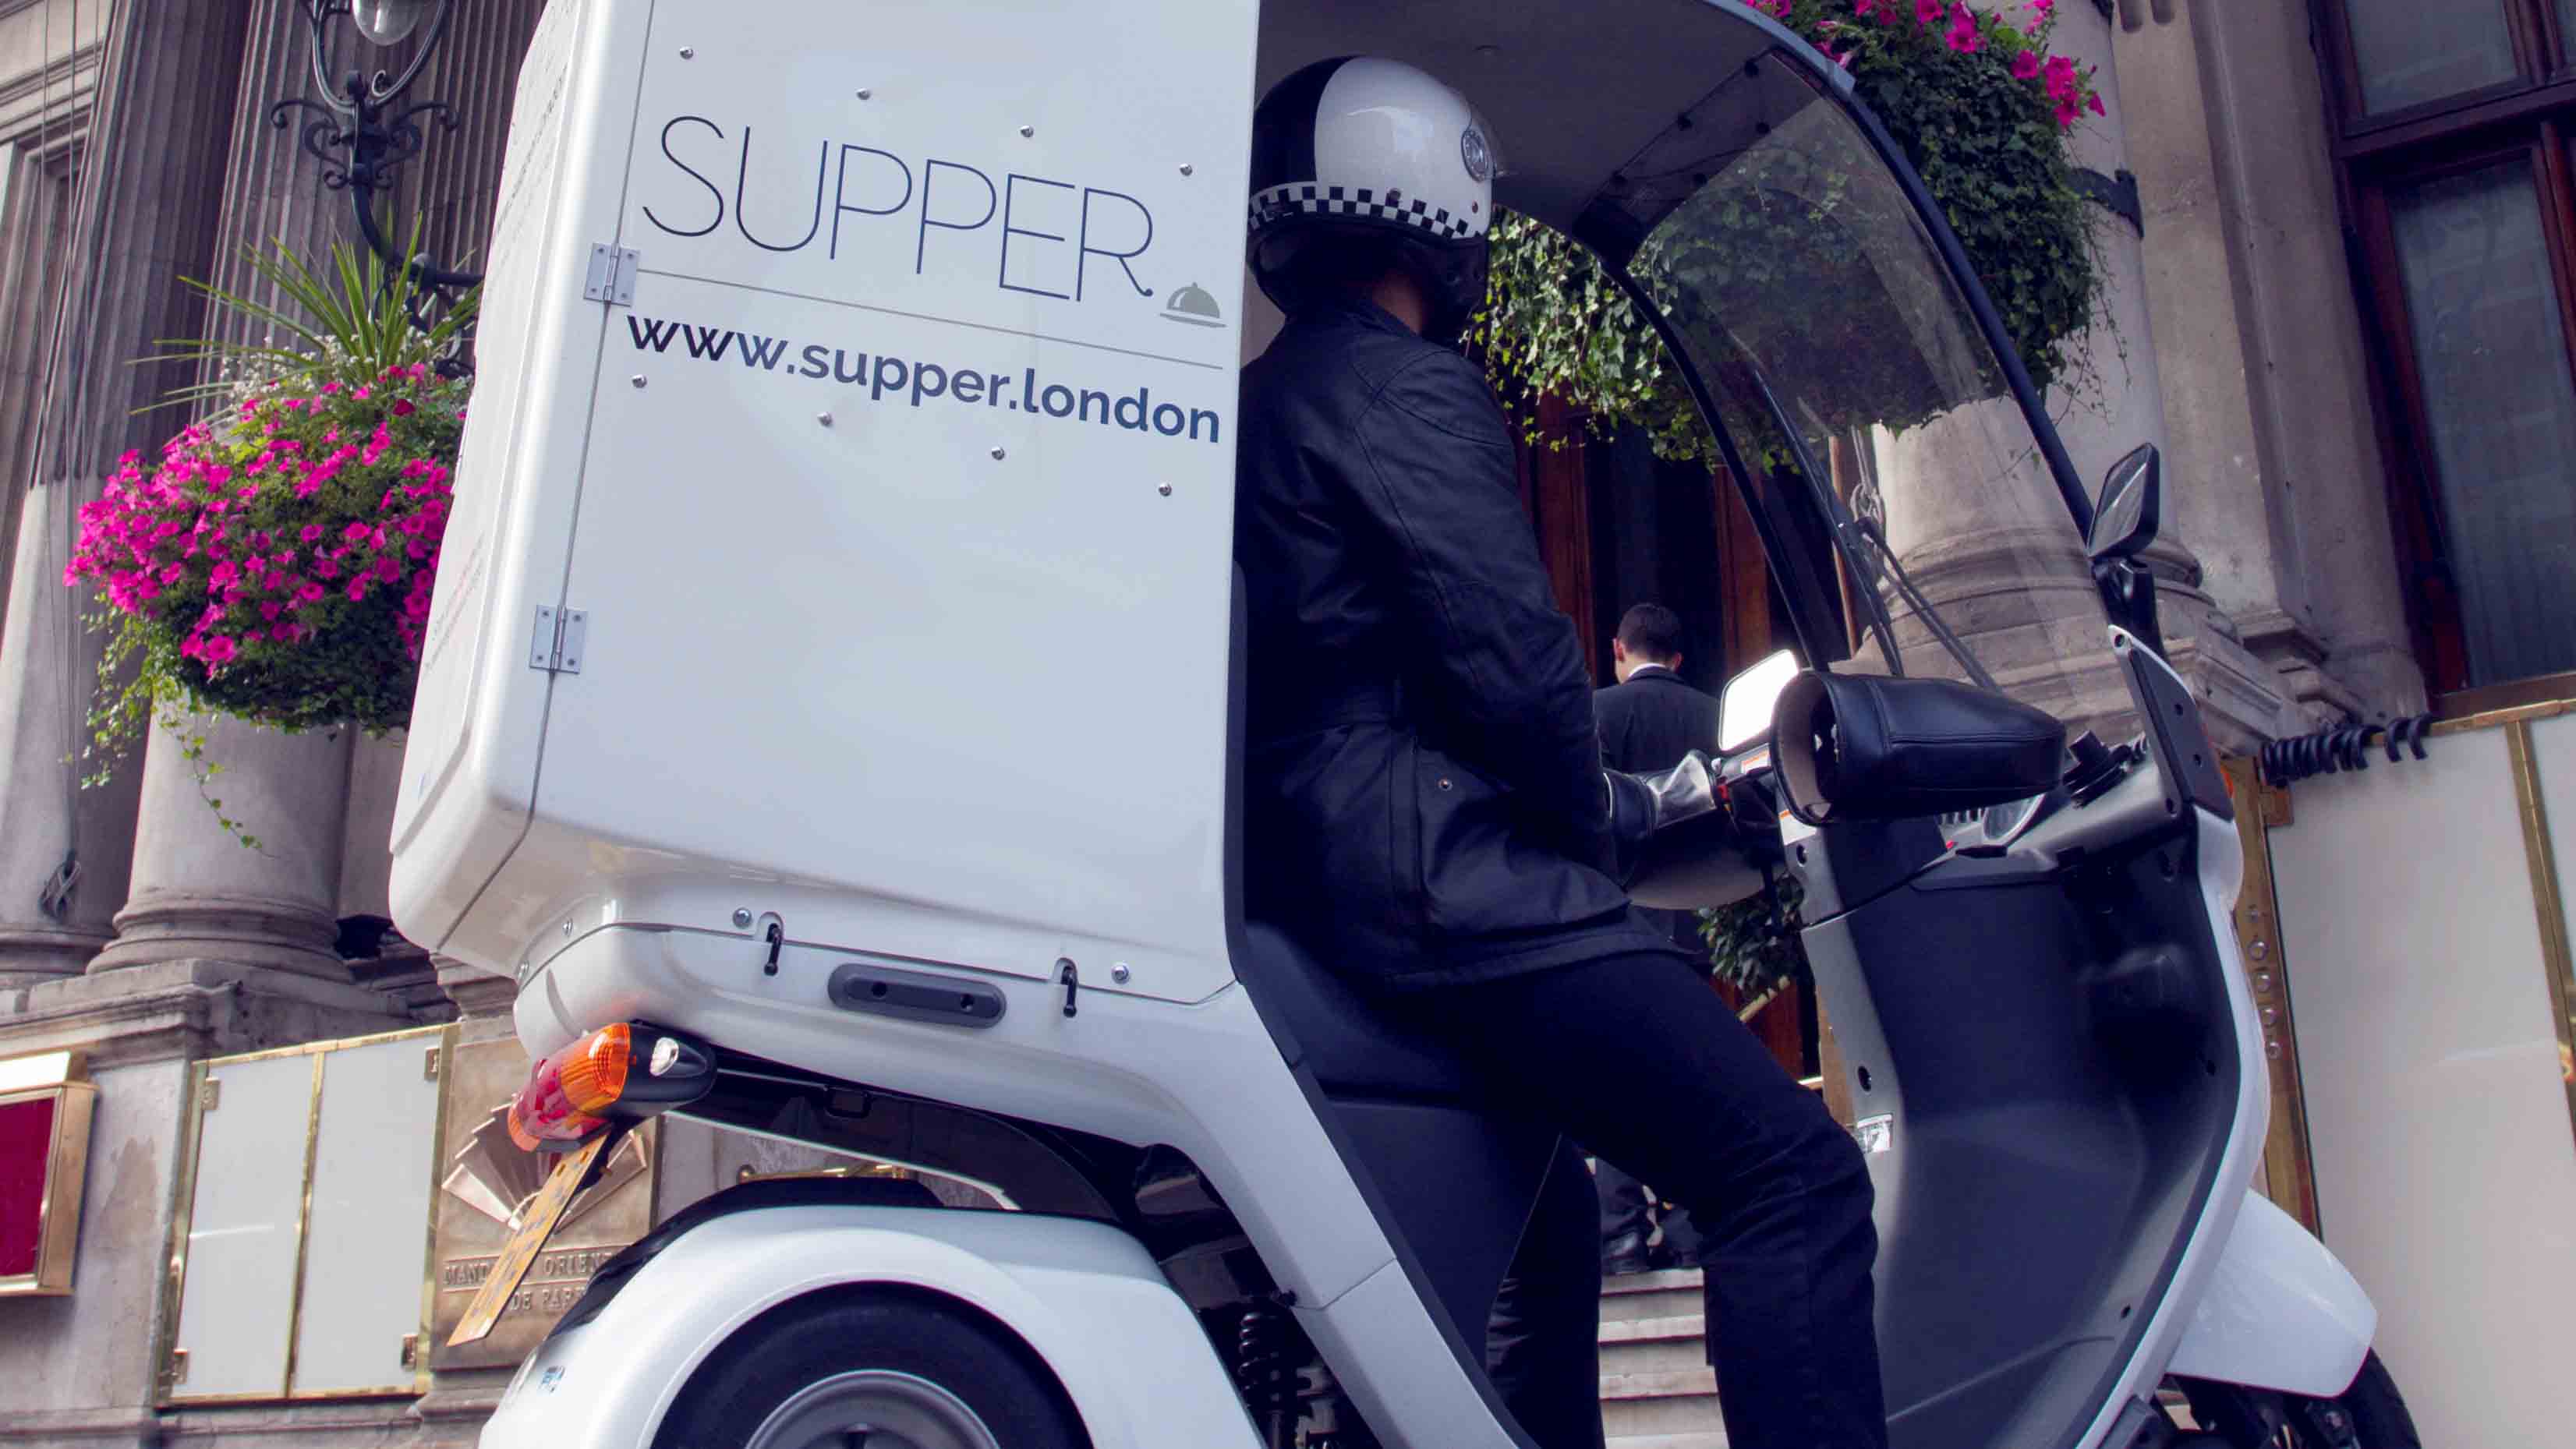 Michelin star delivery service launches crowdfunding campaign to